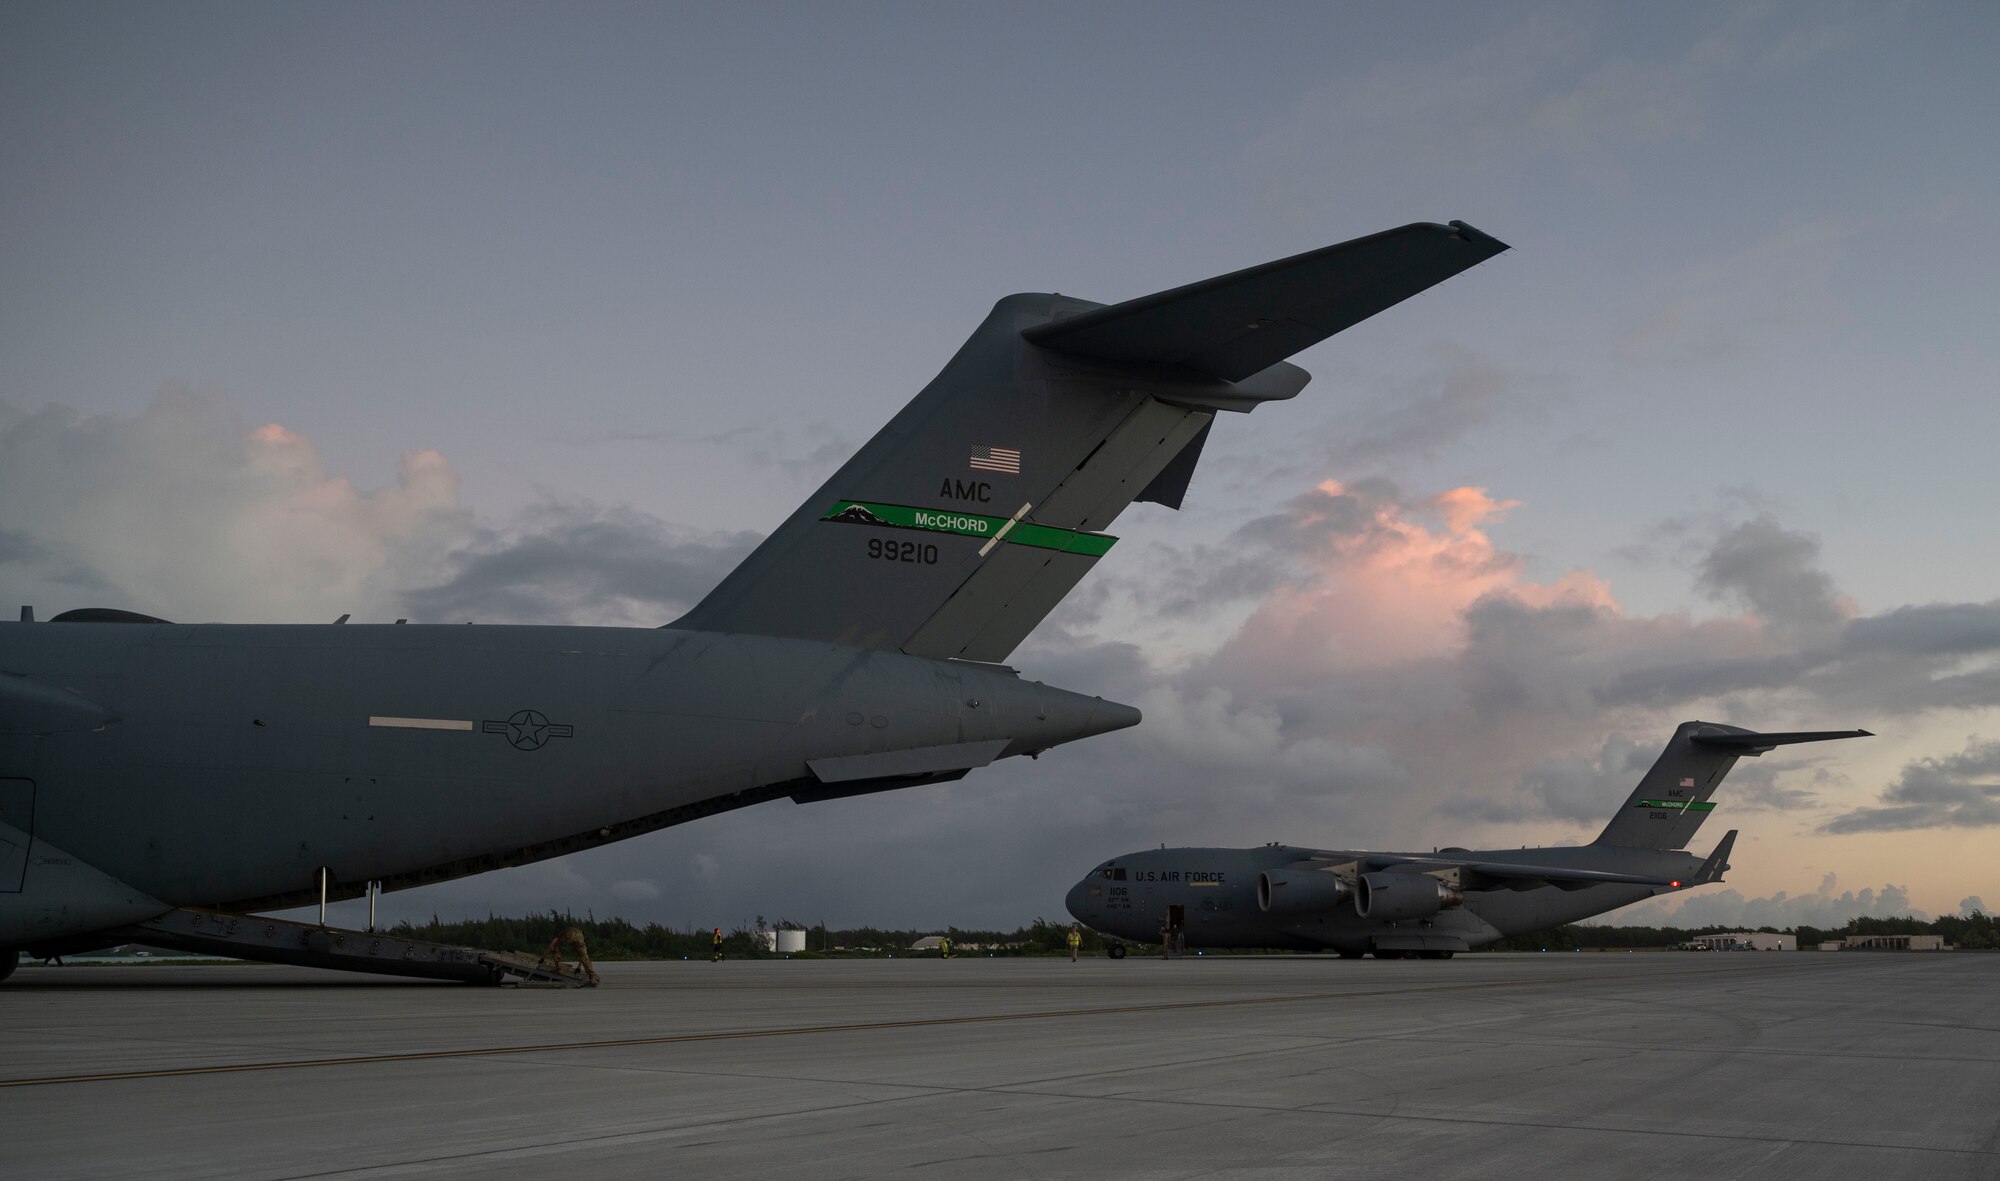 Two C-17 Globemaster IIIs assigned to Joint Base Lewis-McChord, Washington, land at Wake Island during Exercise Rainier War 21B, Nov. 5, 2021. Rainier War is a semi-annual, large readiness exercise led by the 62nd Airlift Wing, designed to train aircrews under realistic scenarios that support full spectrum readiness operations against modern threats and replicate today’s contingency operations. (U.S. Air Force photo by Staff Sgt. Rachel Williams)